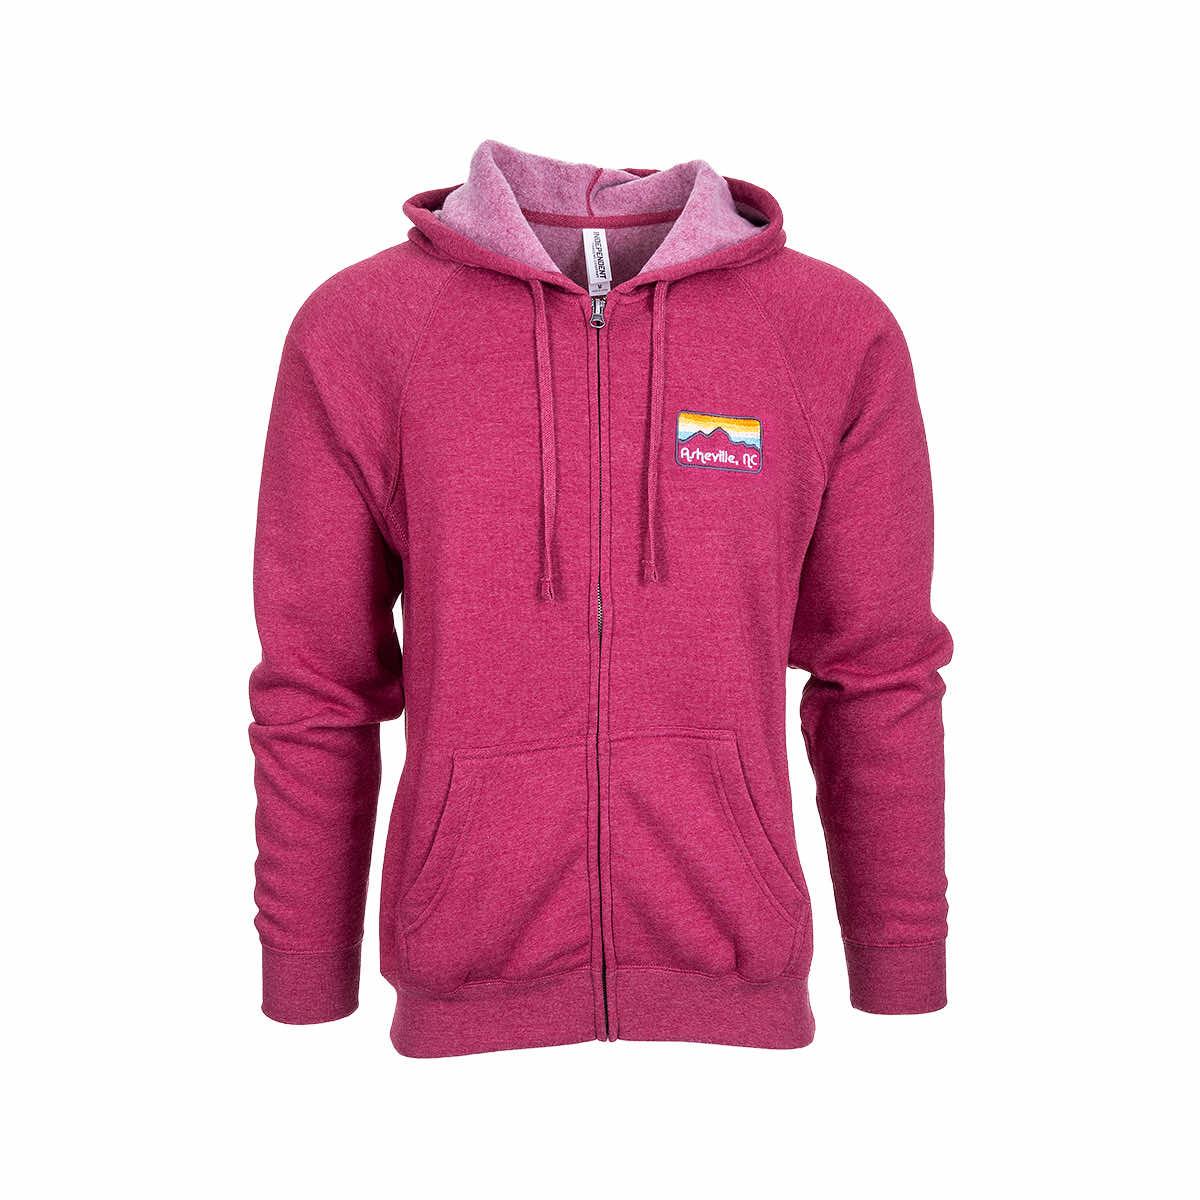  Asheville Embroidered Sunset Full Zip Hoodie